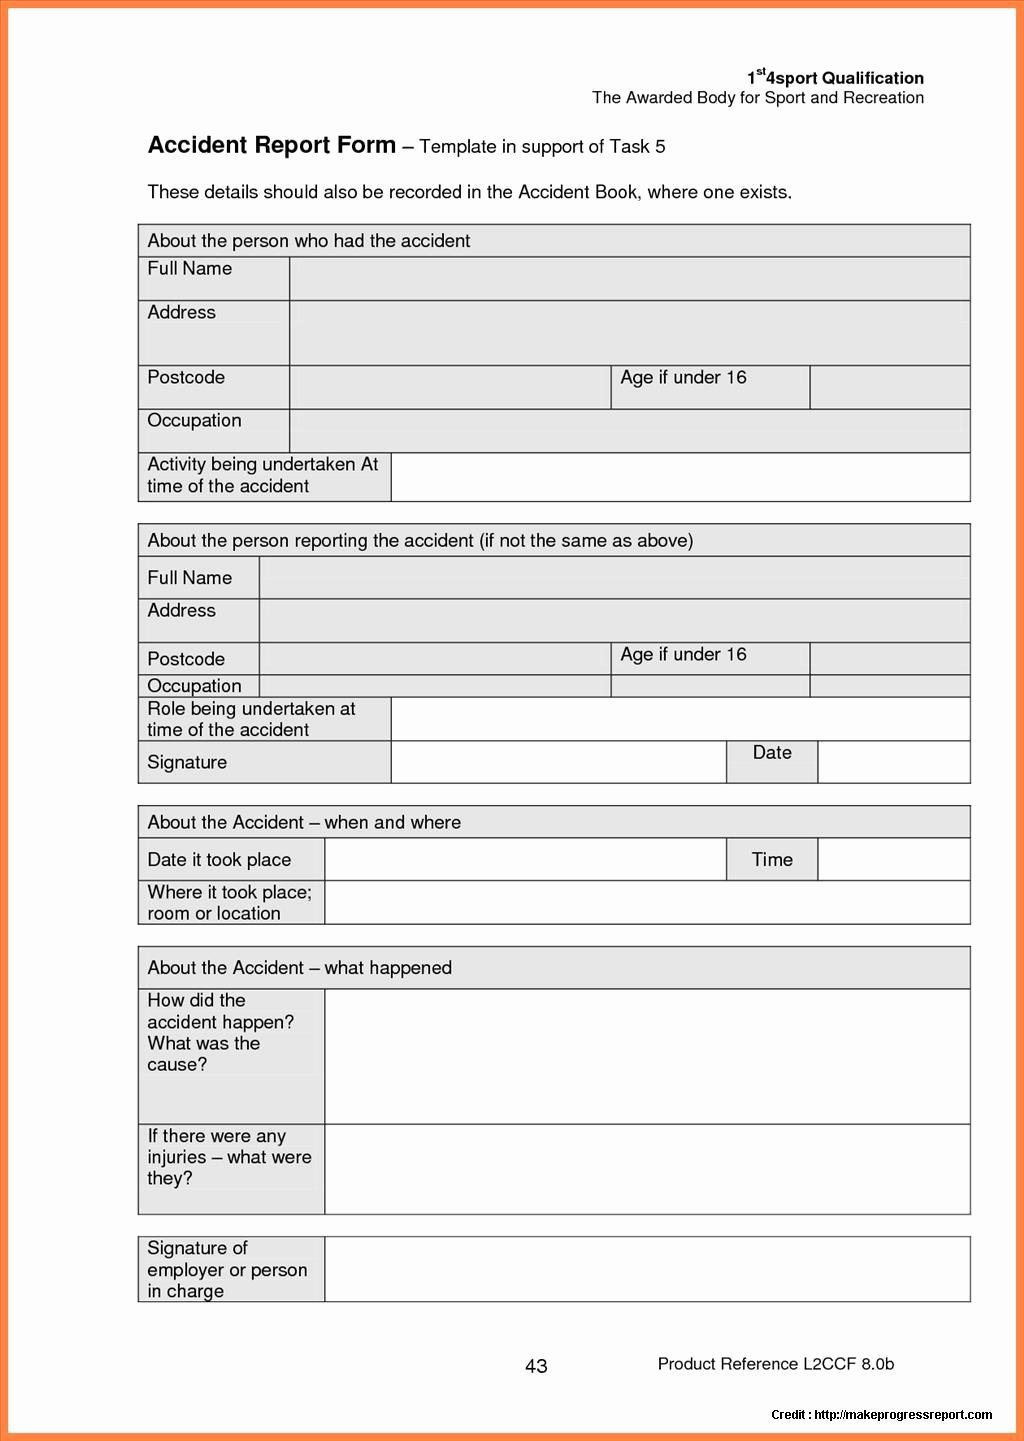 Accident Reporting form Template Best Of Construction Accident Report form Template form Resume